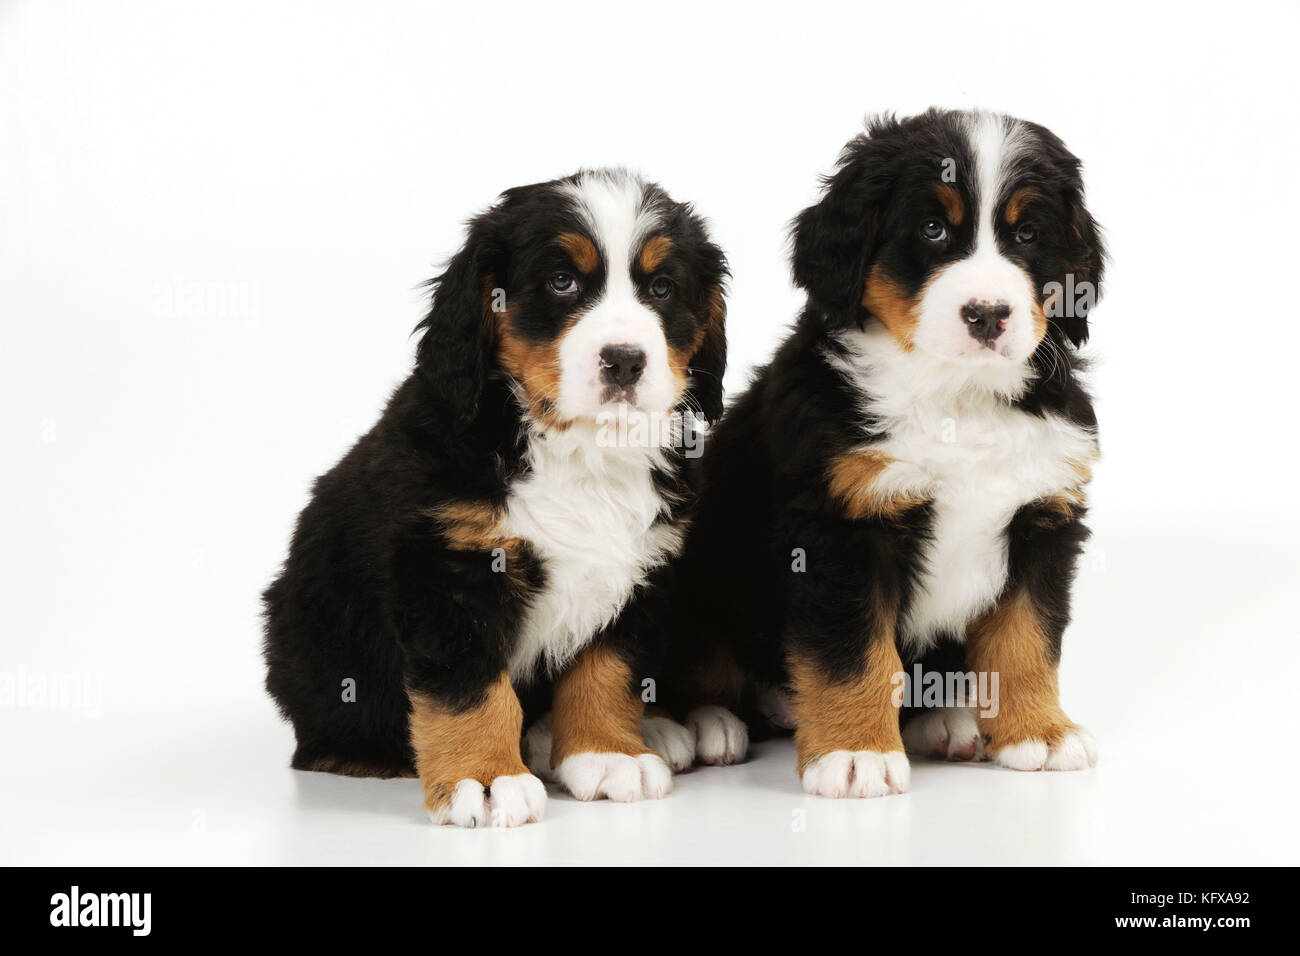 DOG. Bernese mountain puppies sitting together. Also known as Berner Sennenhund. Stock Photo